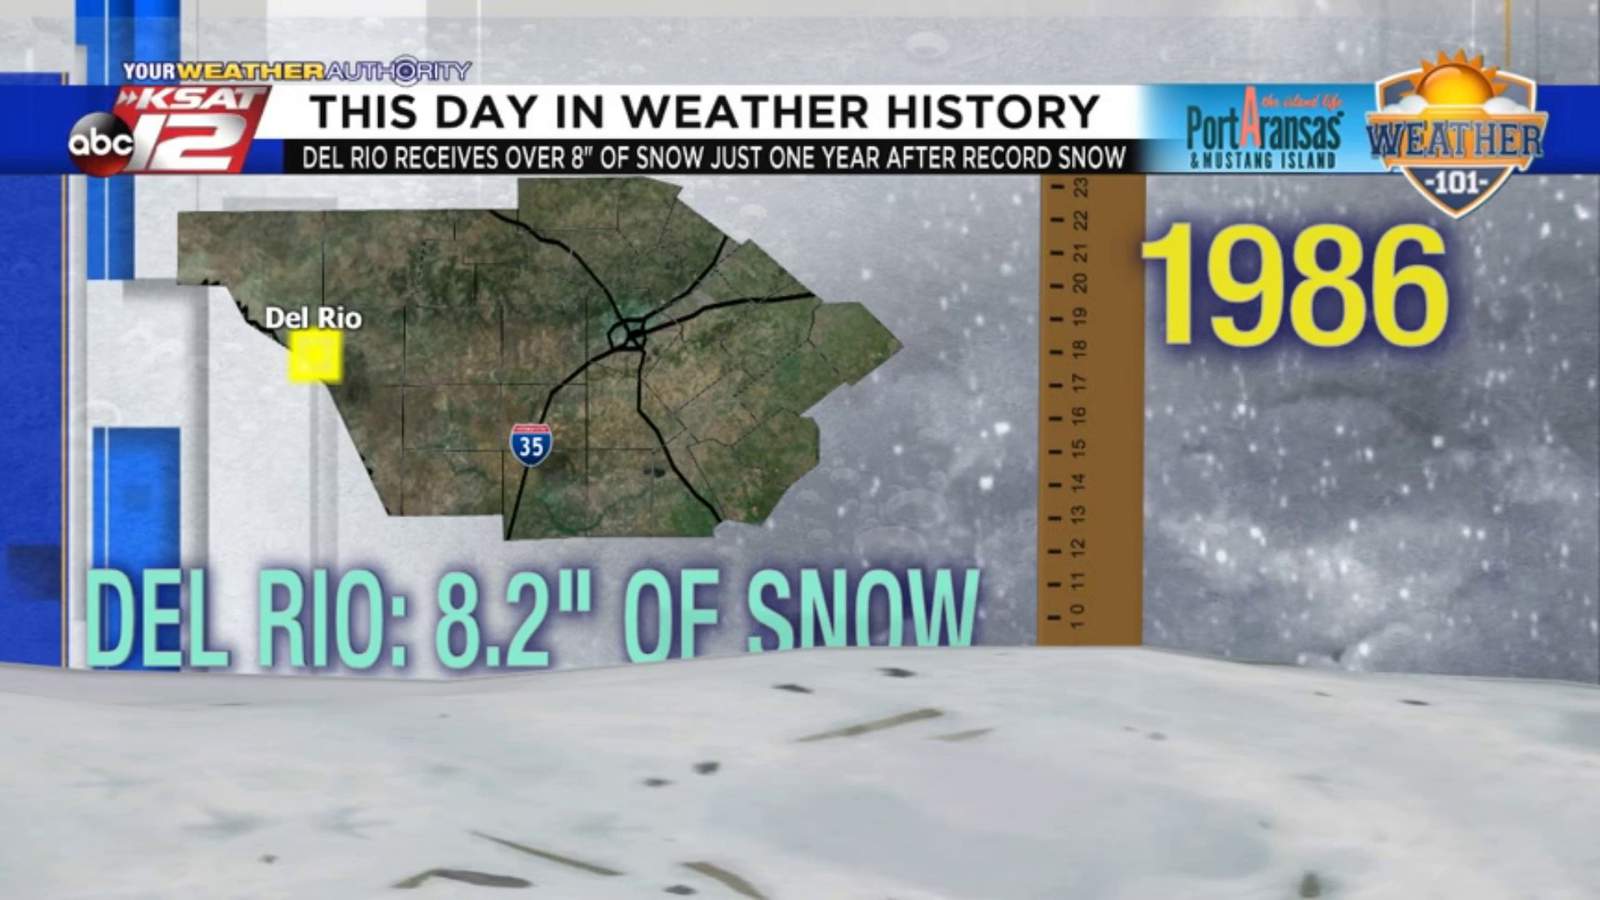 This Day in Weather History: January 7th